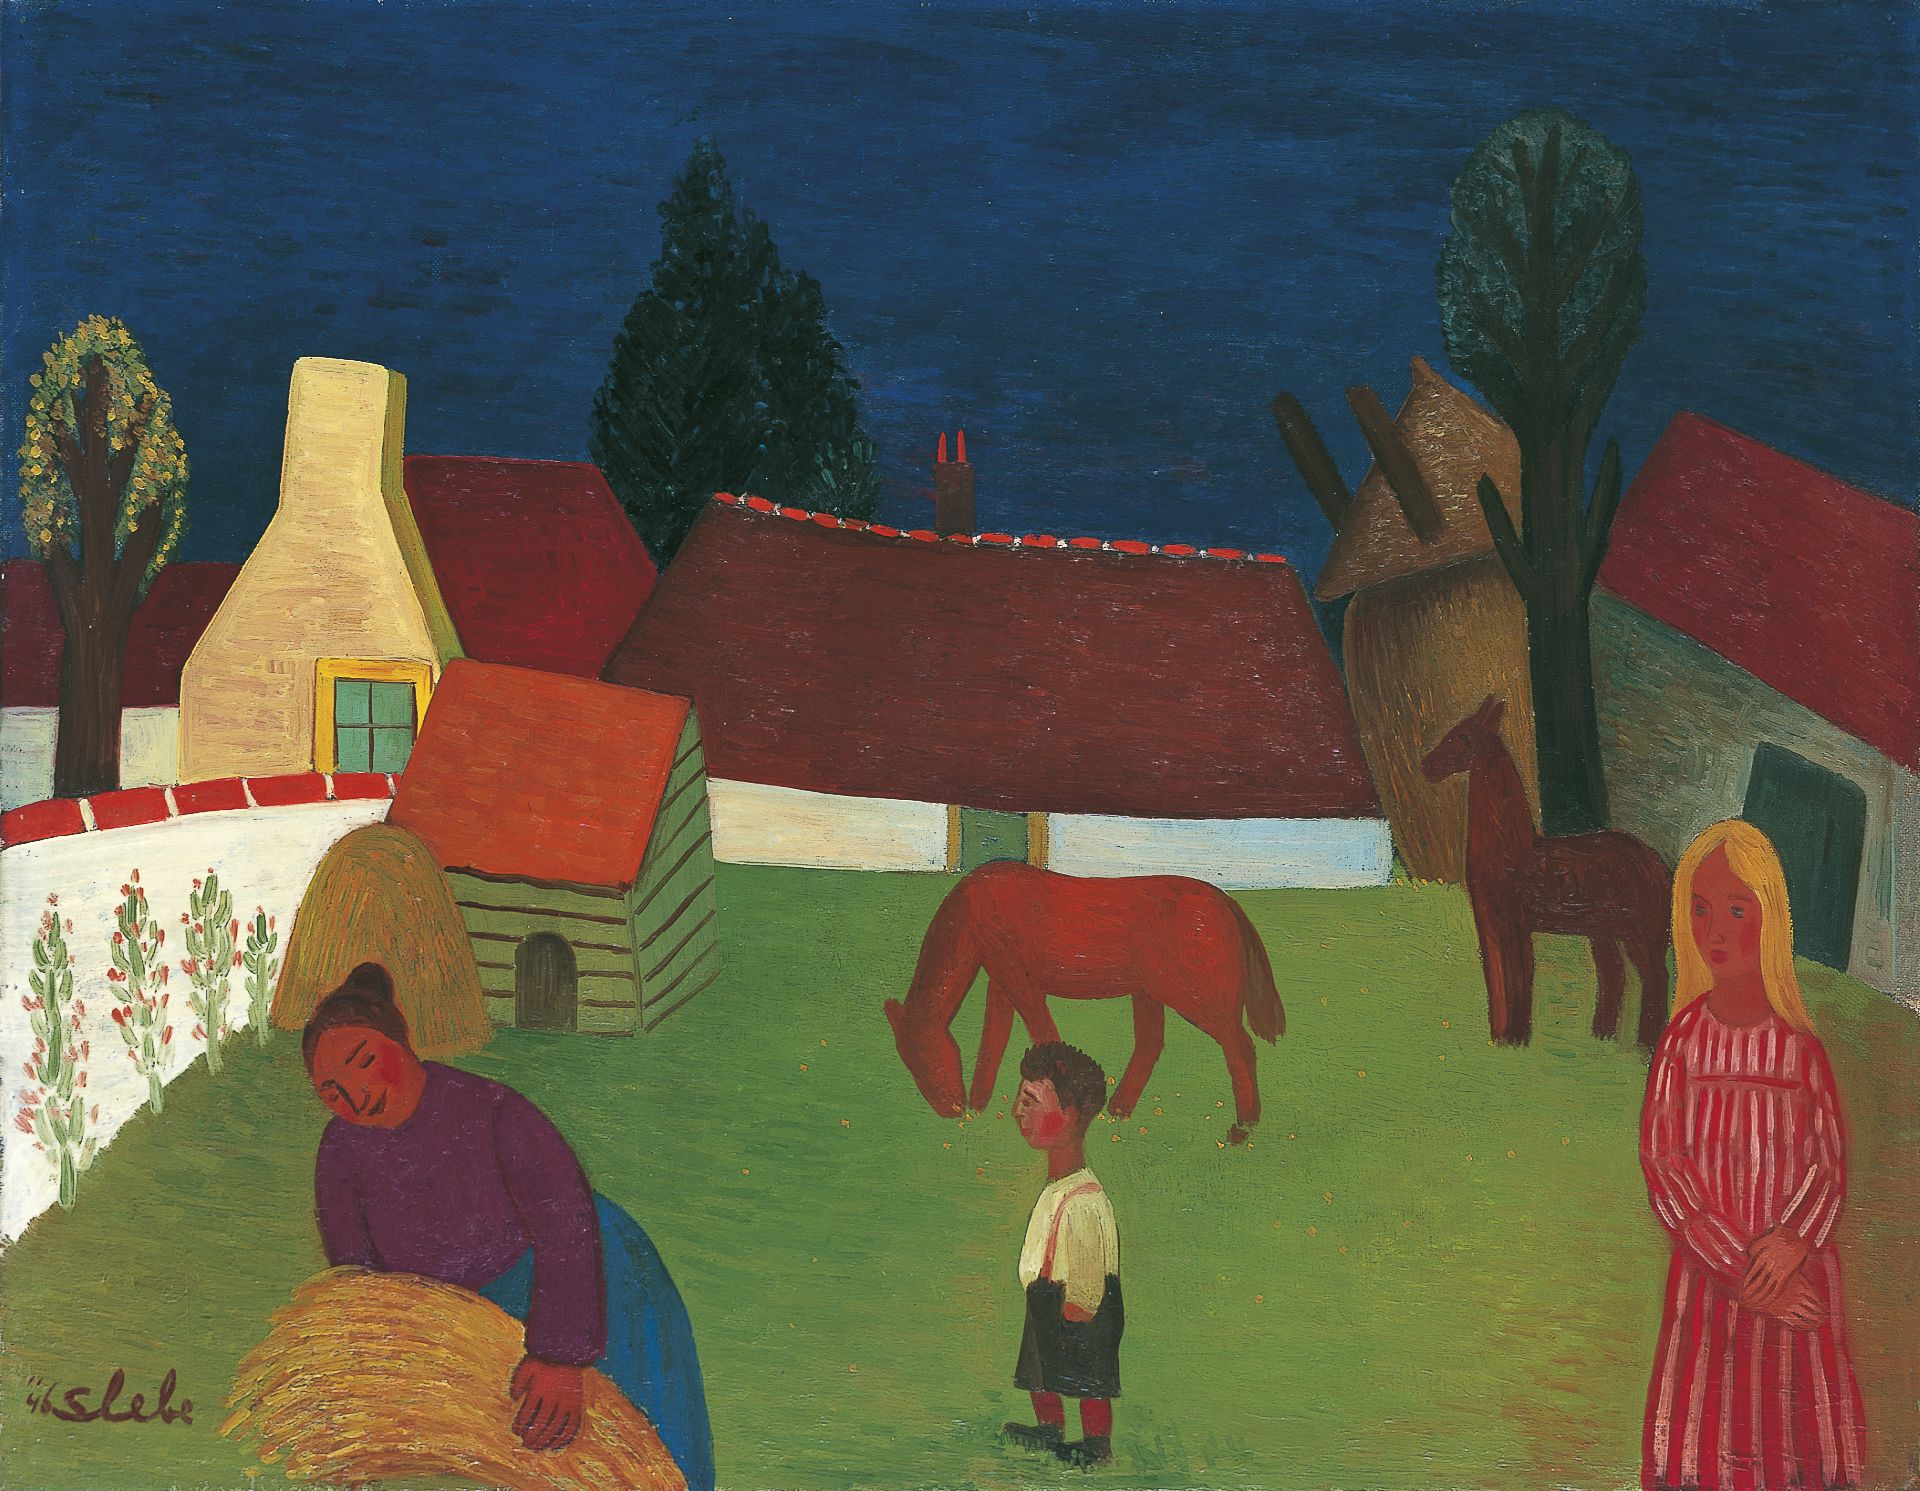 Ferry Slebe | Paintings prev. for Sale | A farm